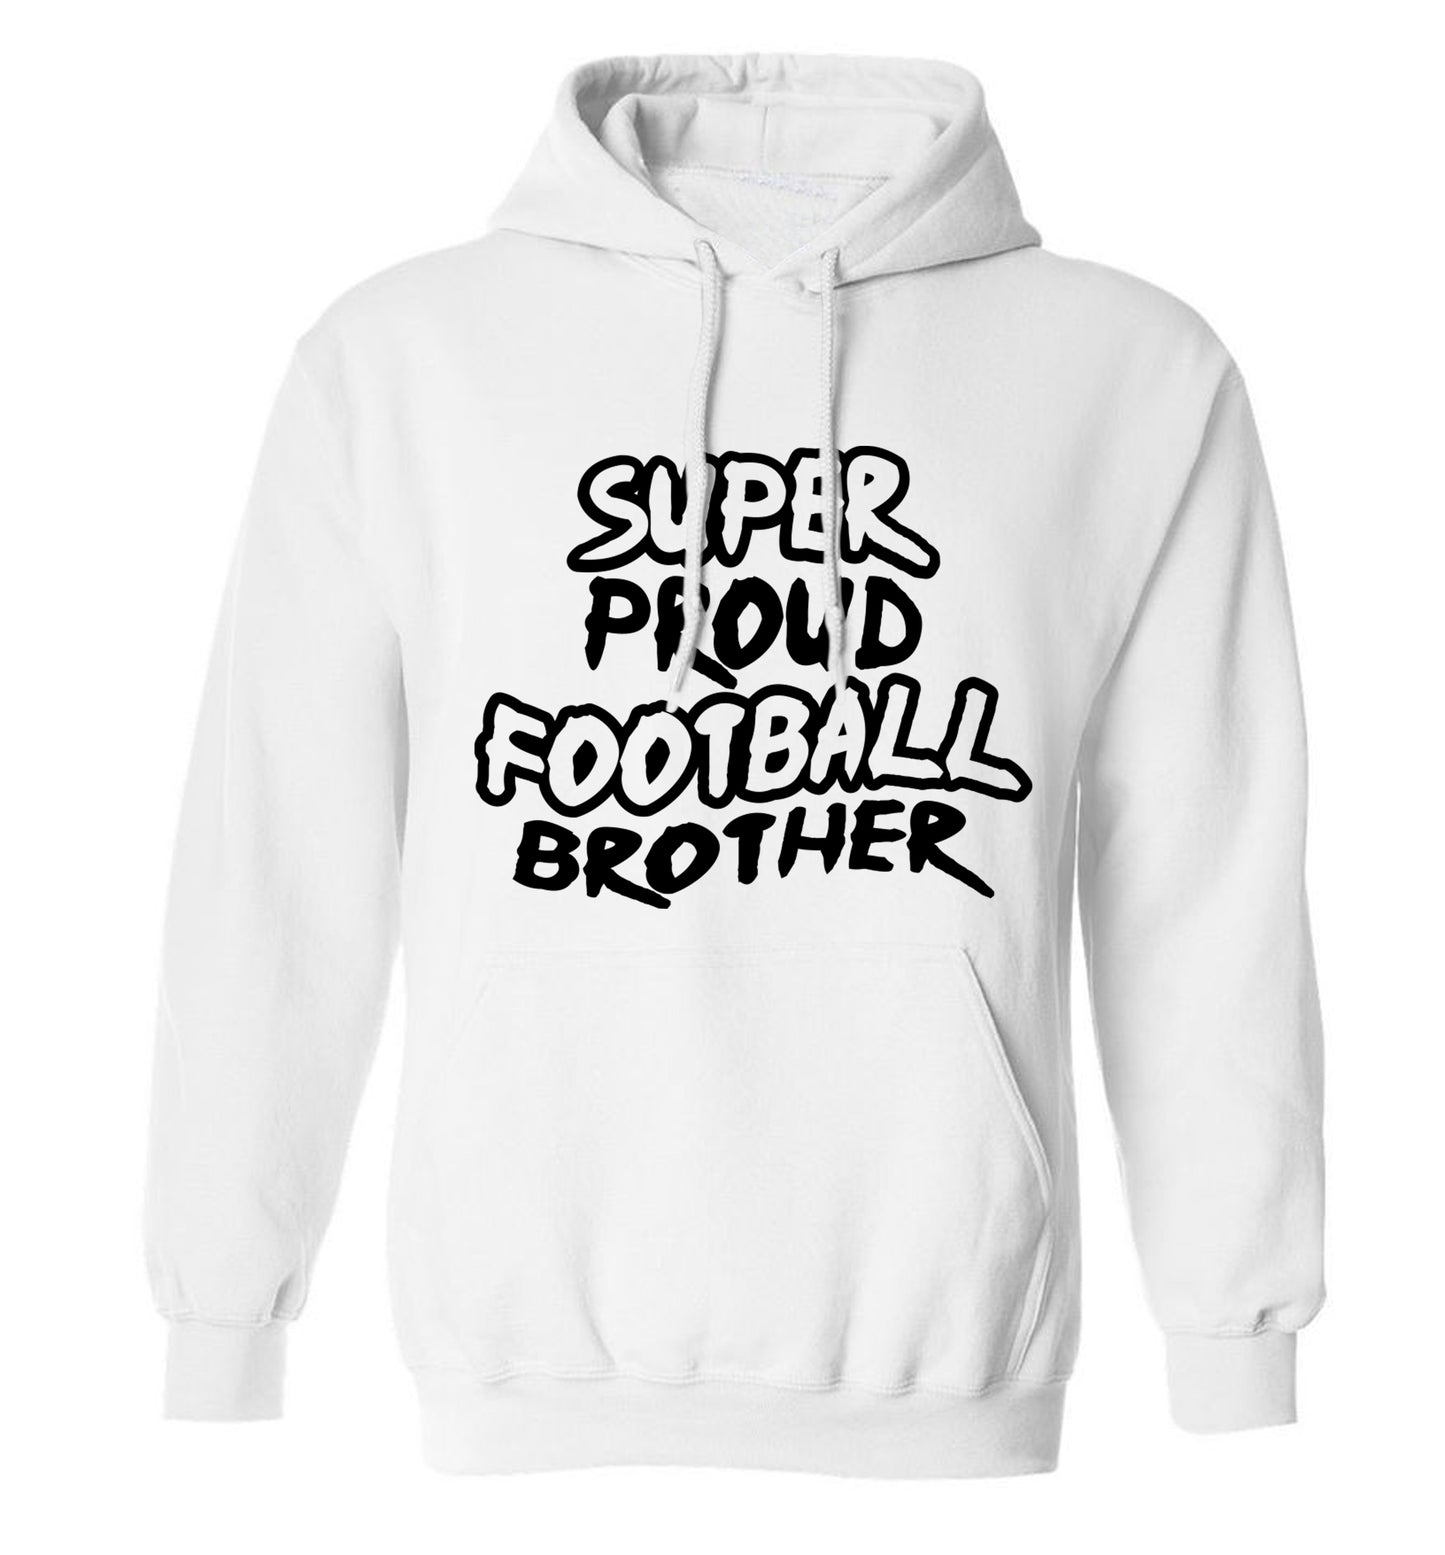 Super proud football brother adults unisexwhite hoodie 2XL